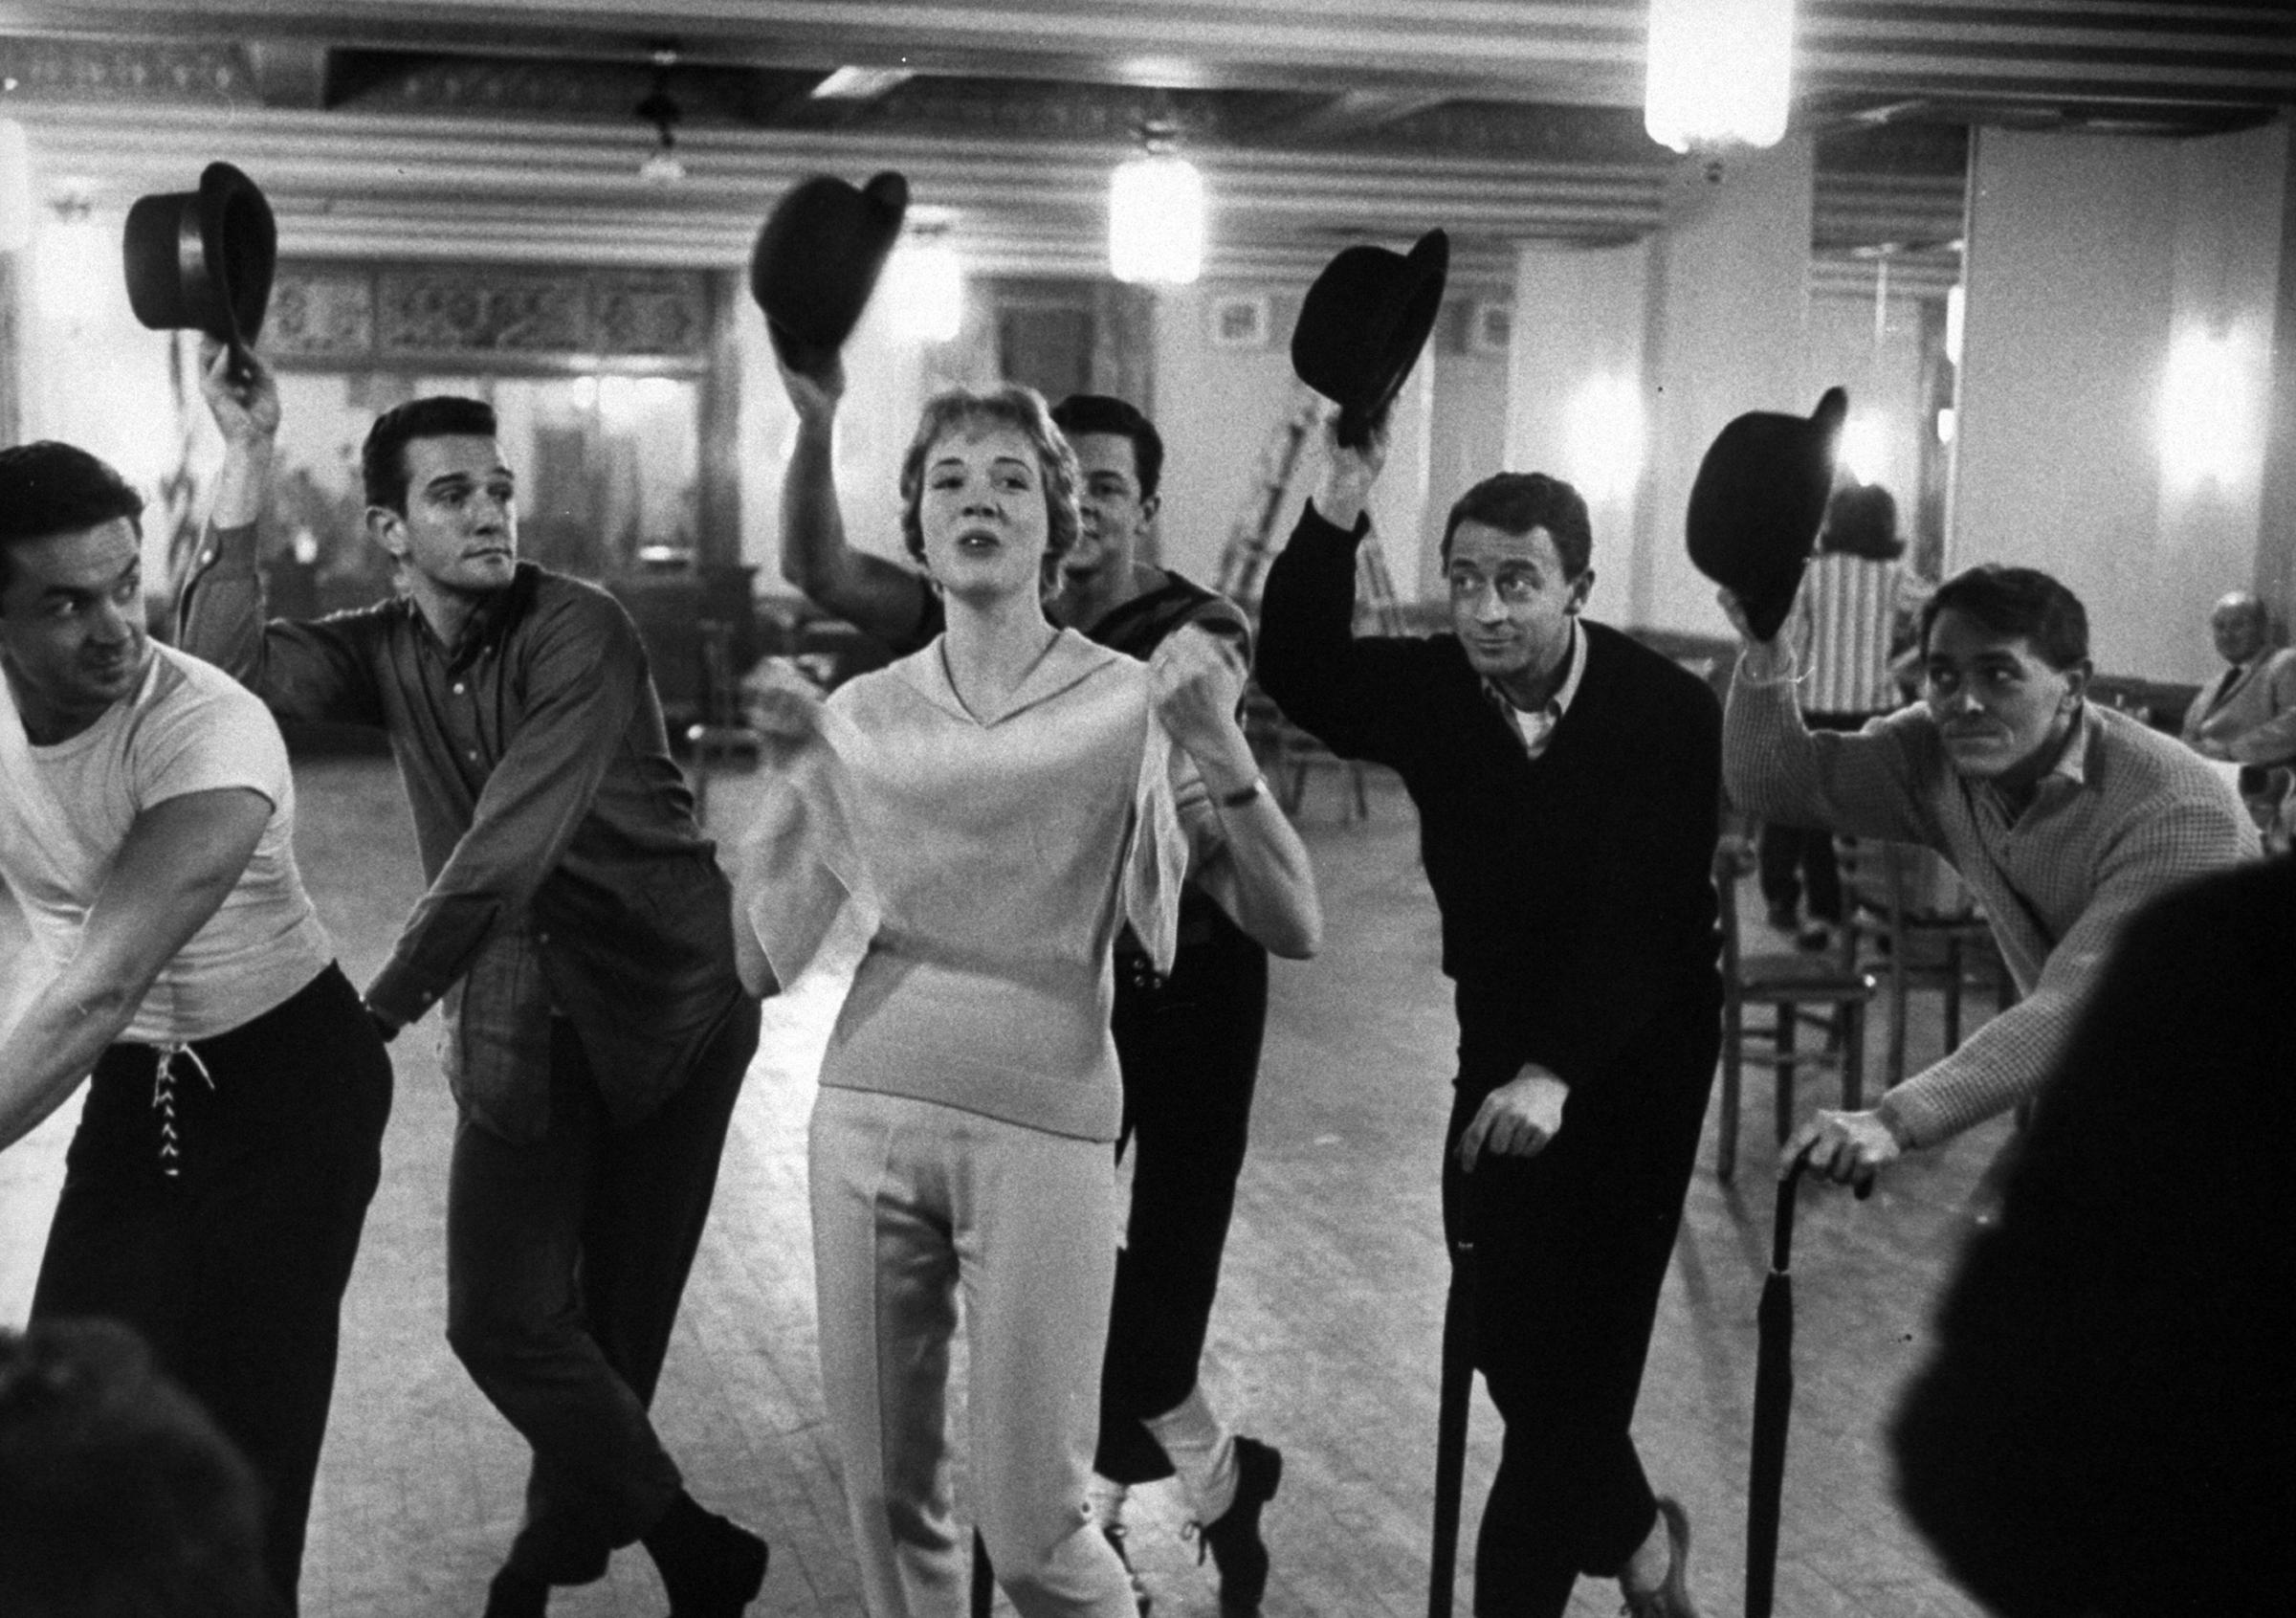 Julie Andrews, rehearsing for TV show "Broadway of Lerner and Loewe."